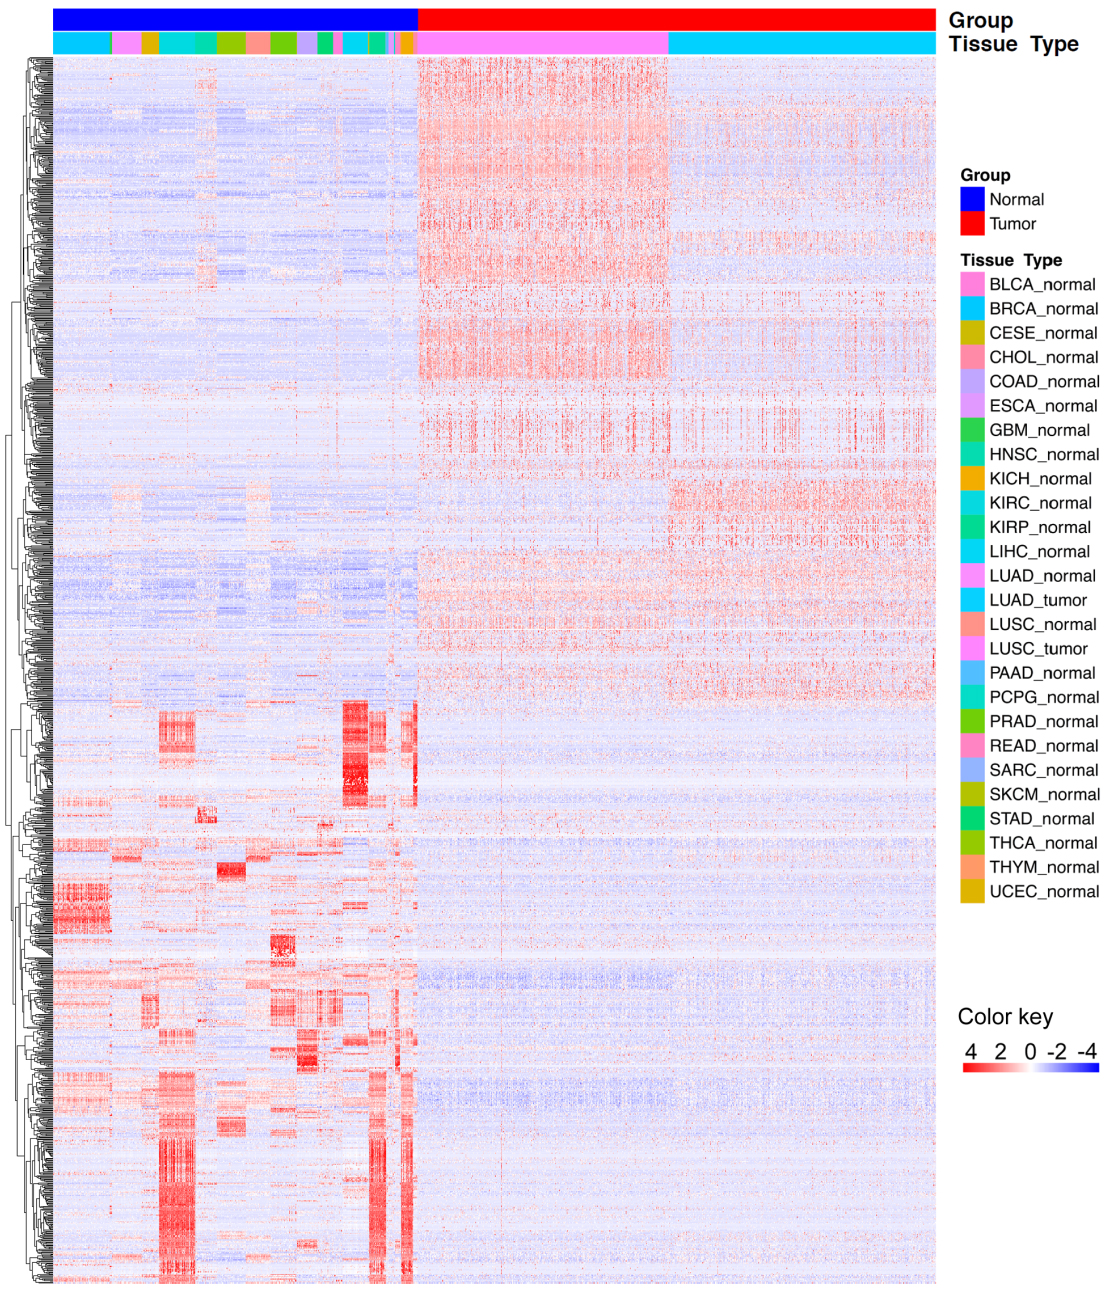 Hierarchical clustering shows that differentially expressed lncRNAs clearly separate tumor tissues from normal tissues.